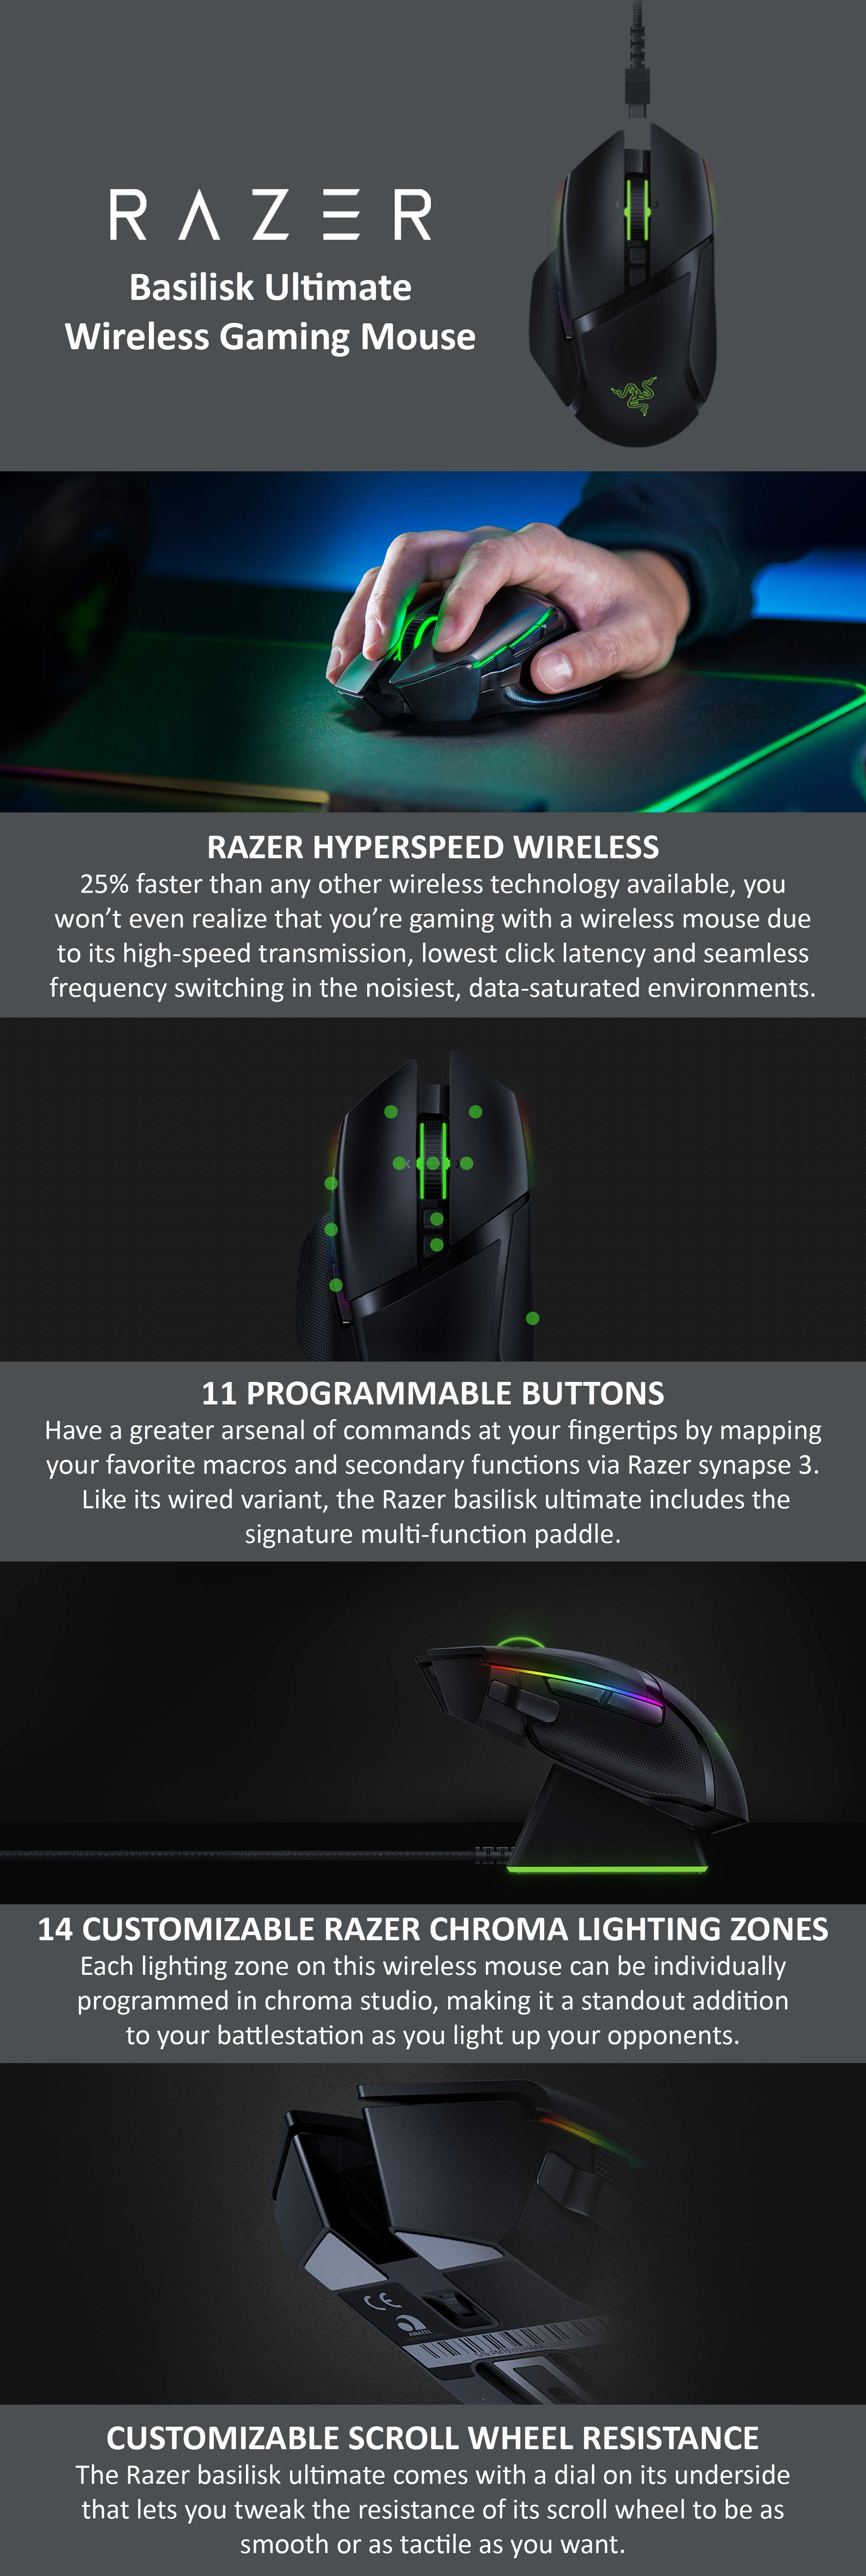 Razer Basilisk Ultimate HyperSpeed Wireless Gaming Mouse with Charging Dock, 20K DPI Optical Sensor, Chroma RGB, 11 Programmable Buttons, 100 Hr Battery - Classic Black Black